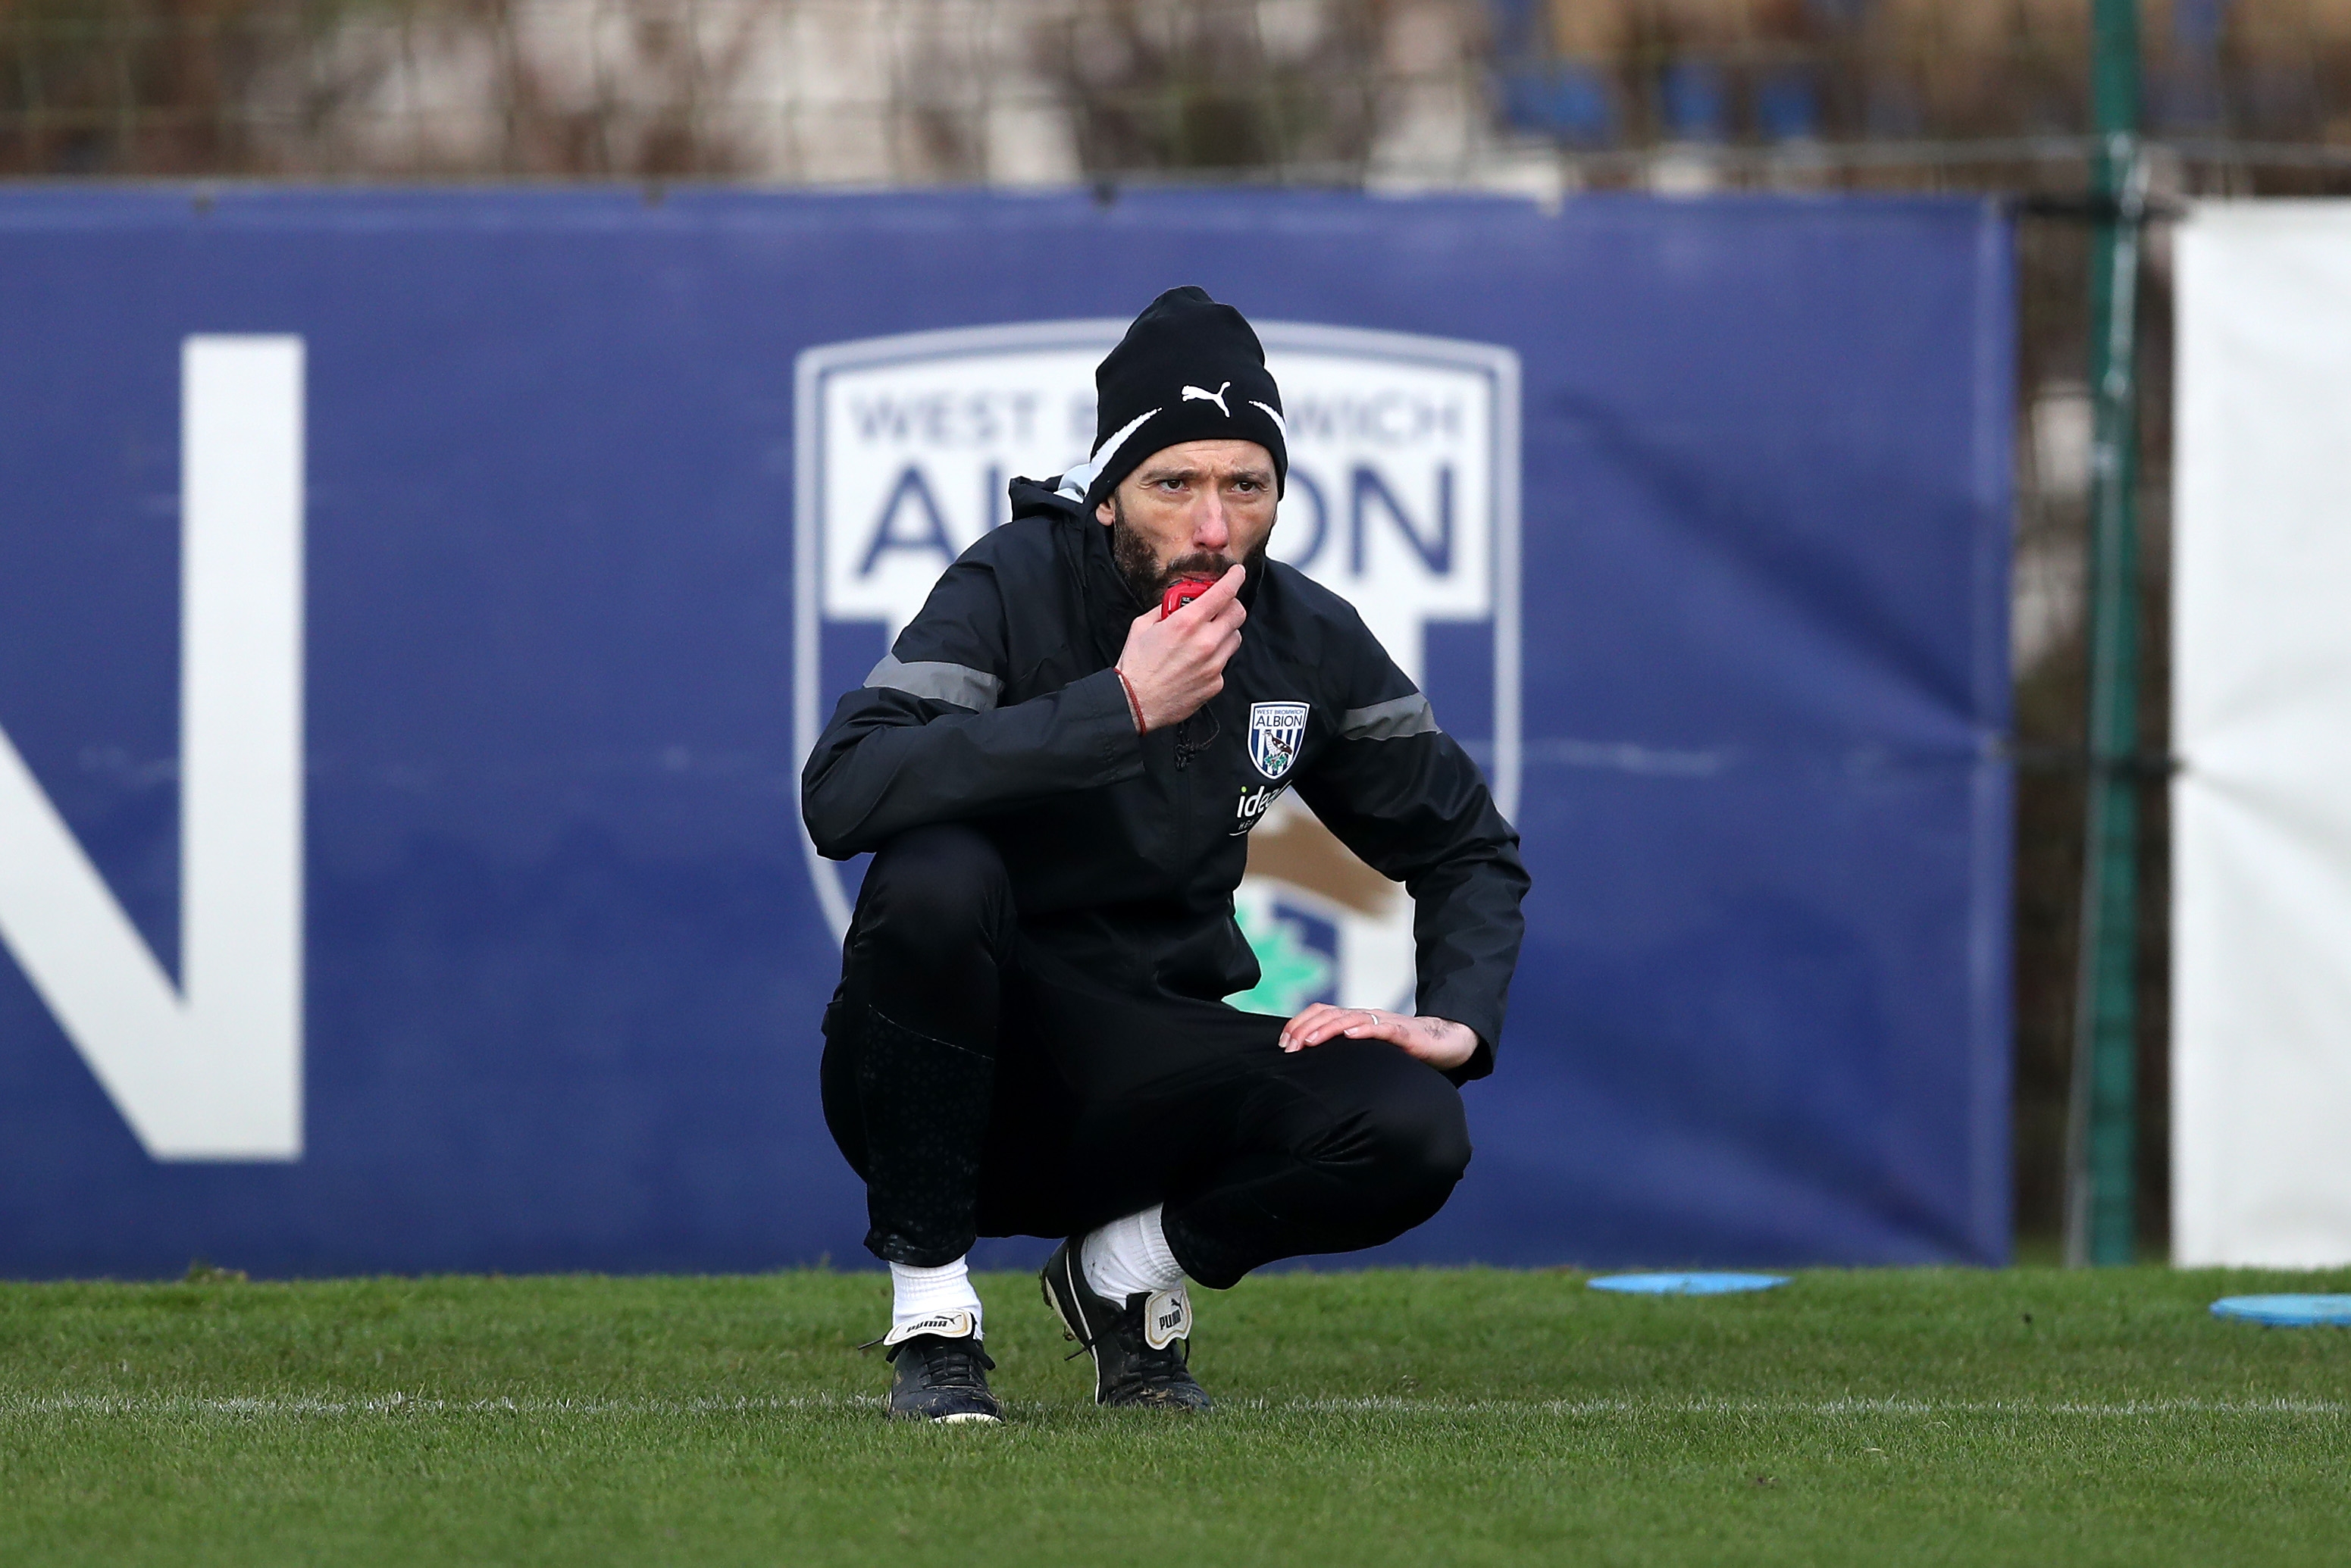 Carlos Corberán crouched down watching training in front of an Albion badge in the background